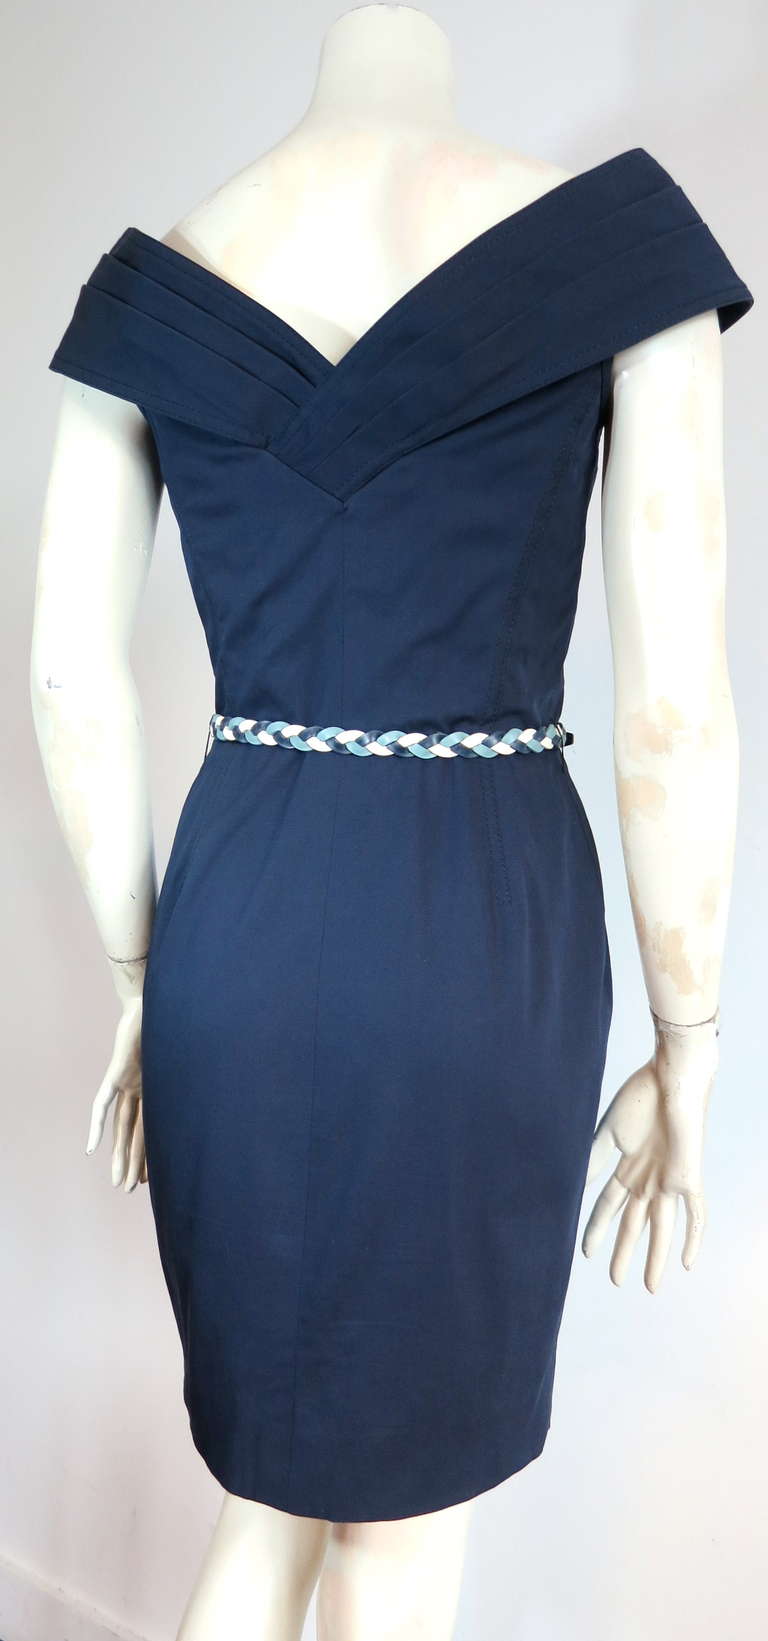 CHRISTIAN DIOR Portrait collar day dress and leather belt at 1stdibs